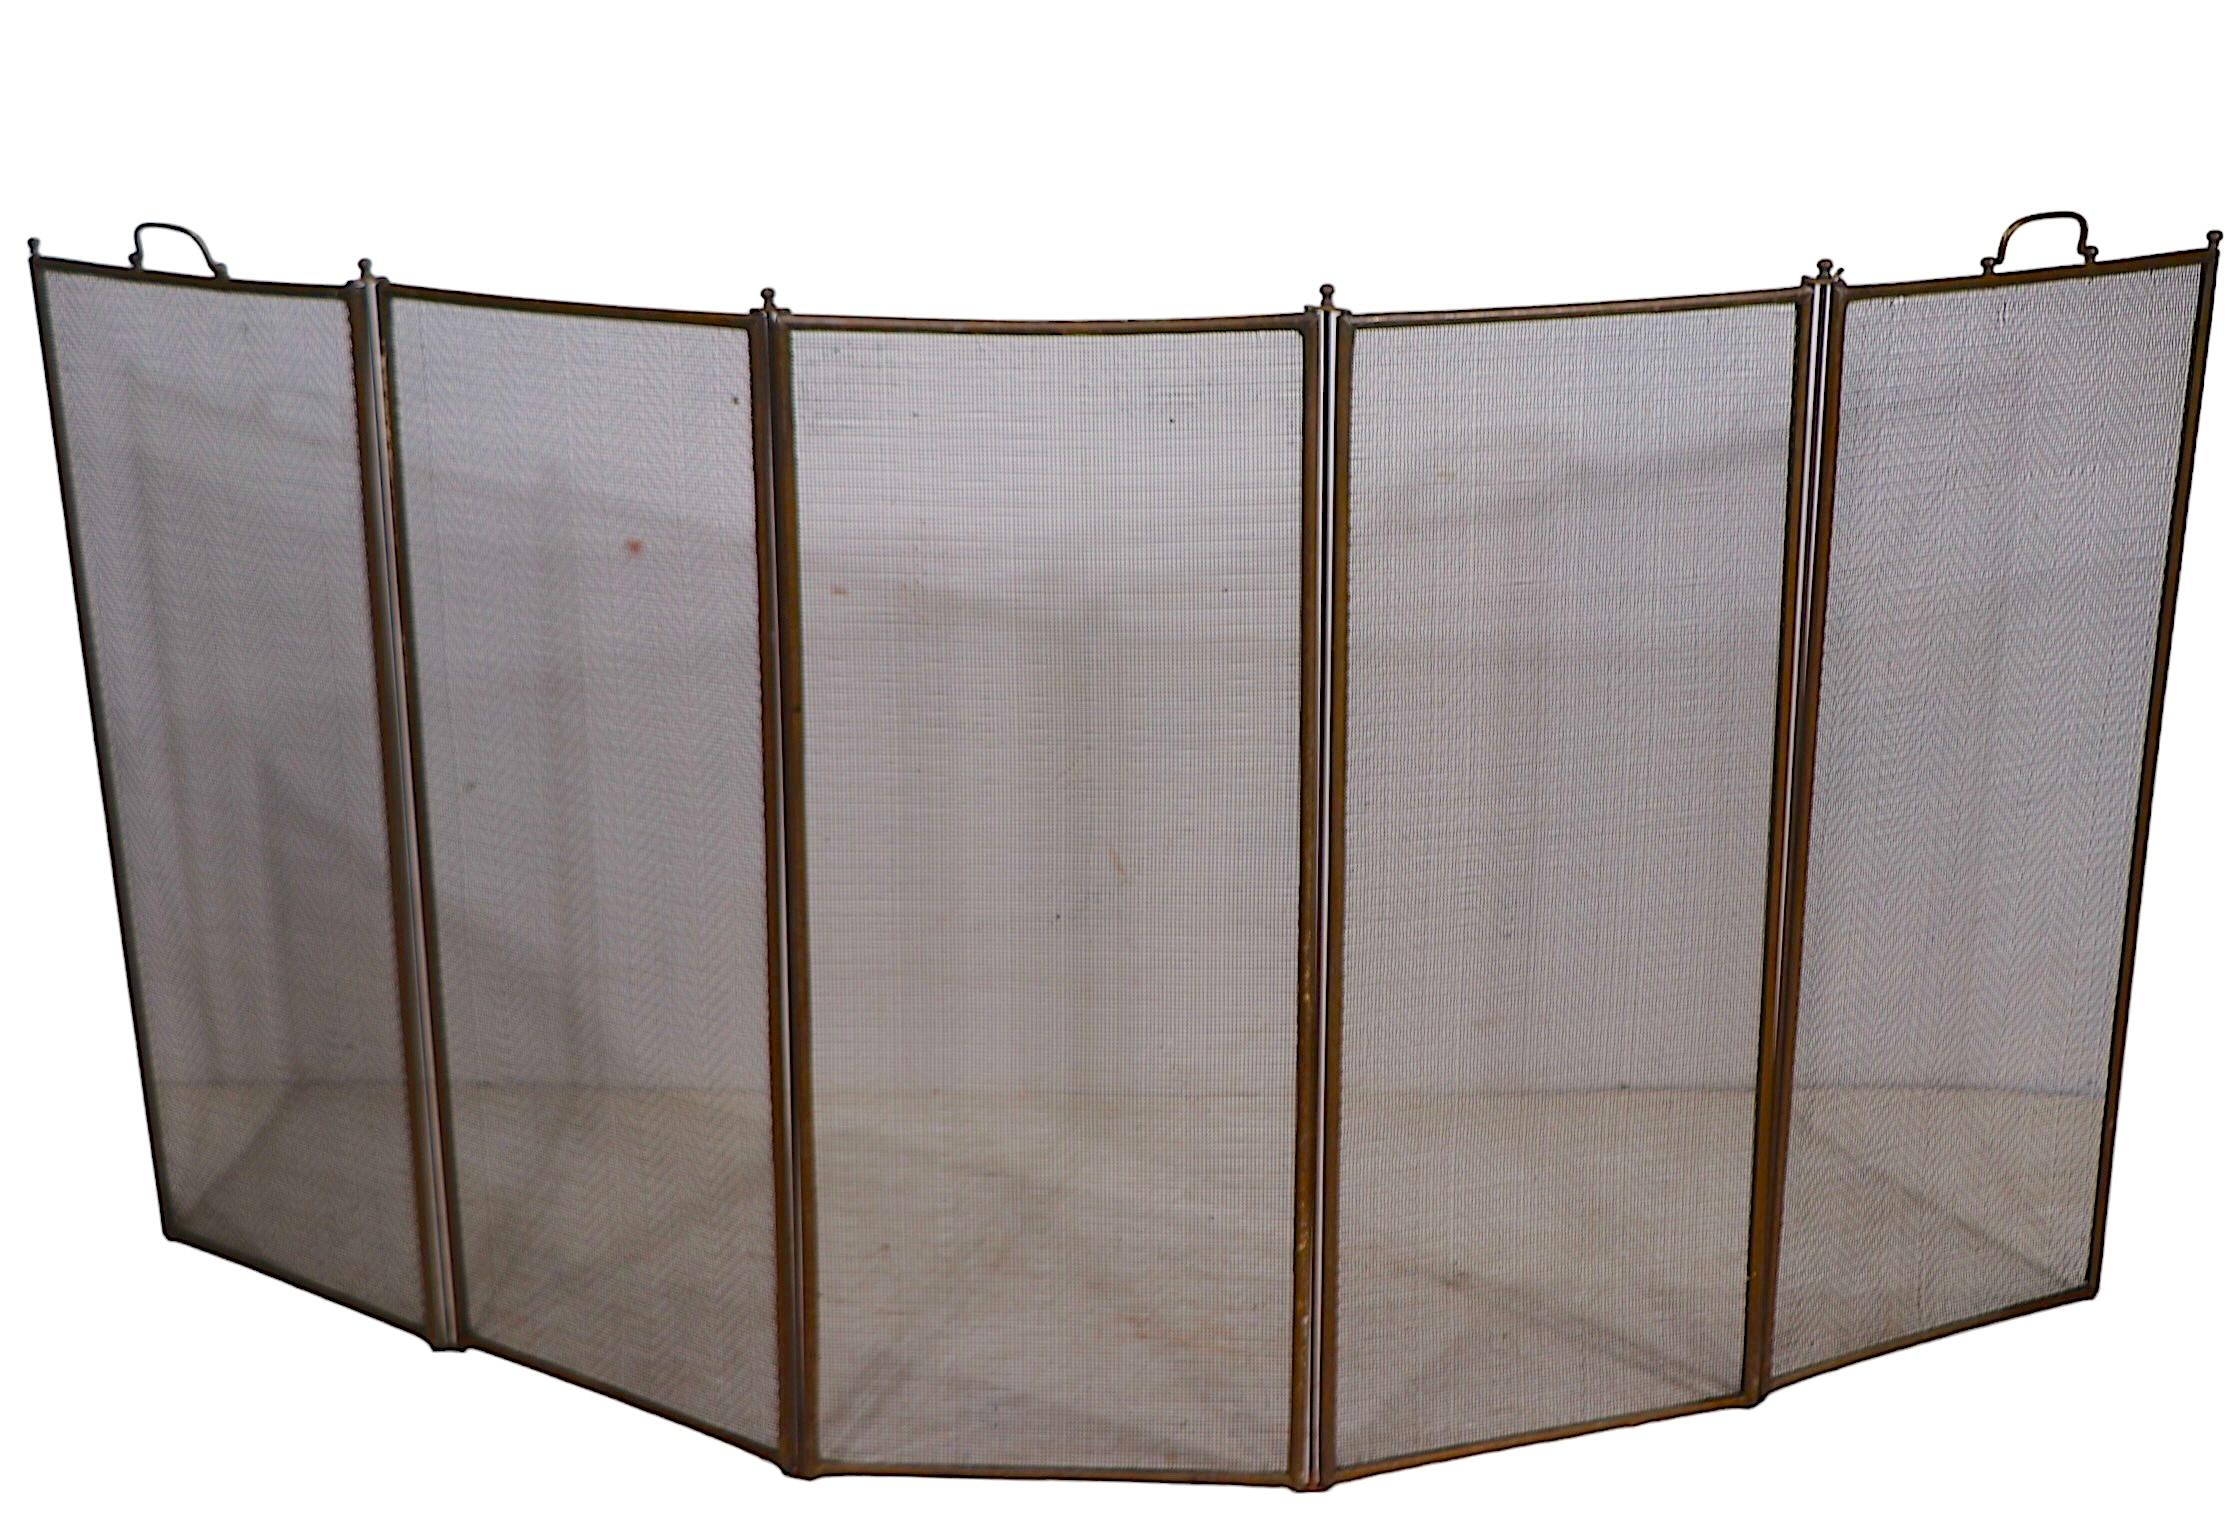 Hard to find five fold spark gard,  fireplace screen, having a brass frame with metal mesh screen panels. The screen is in very good, clean, original, ready to use condition, showing only light cosmetic wear, normal and consistent with age. 
